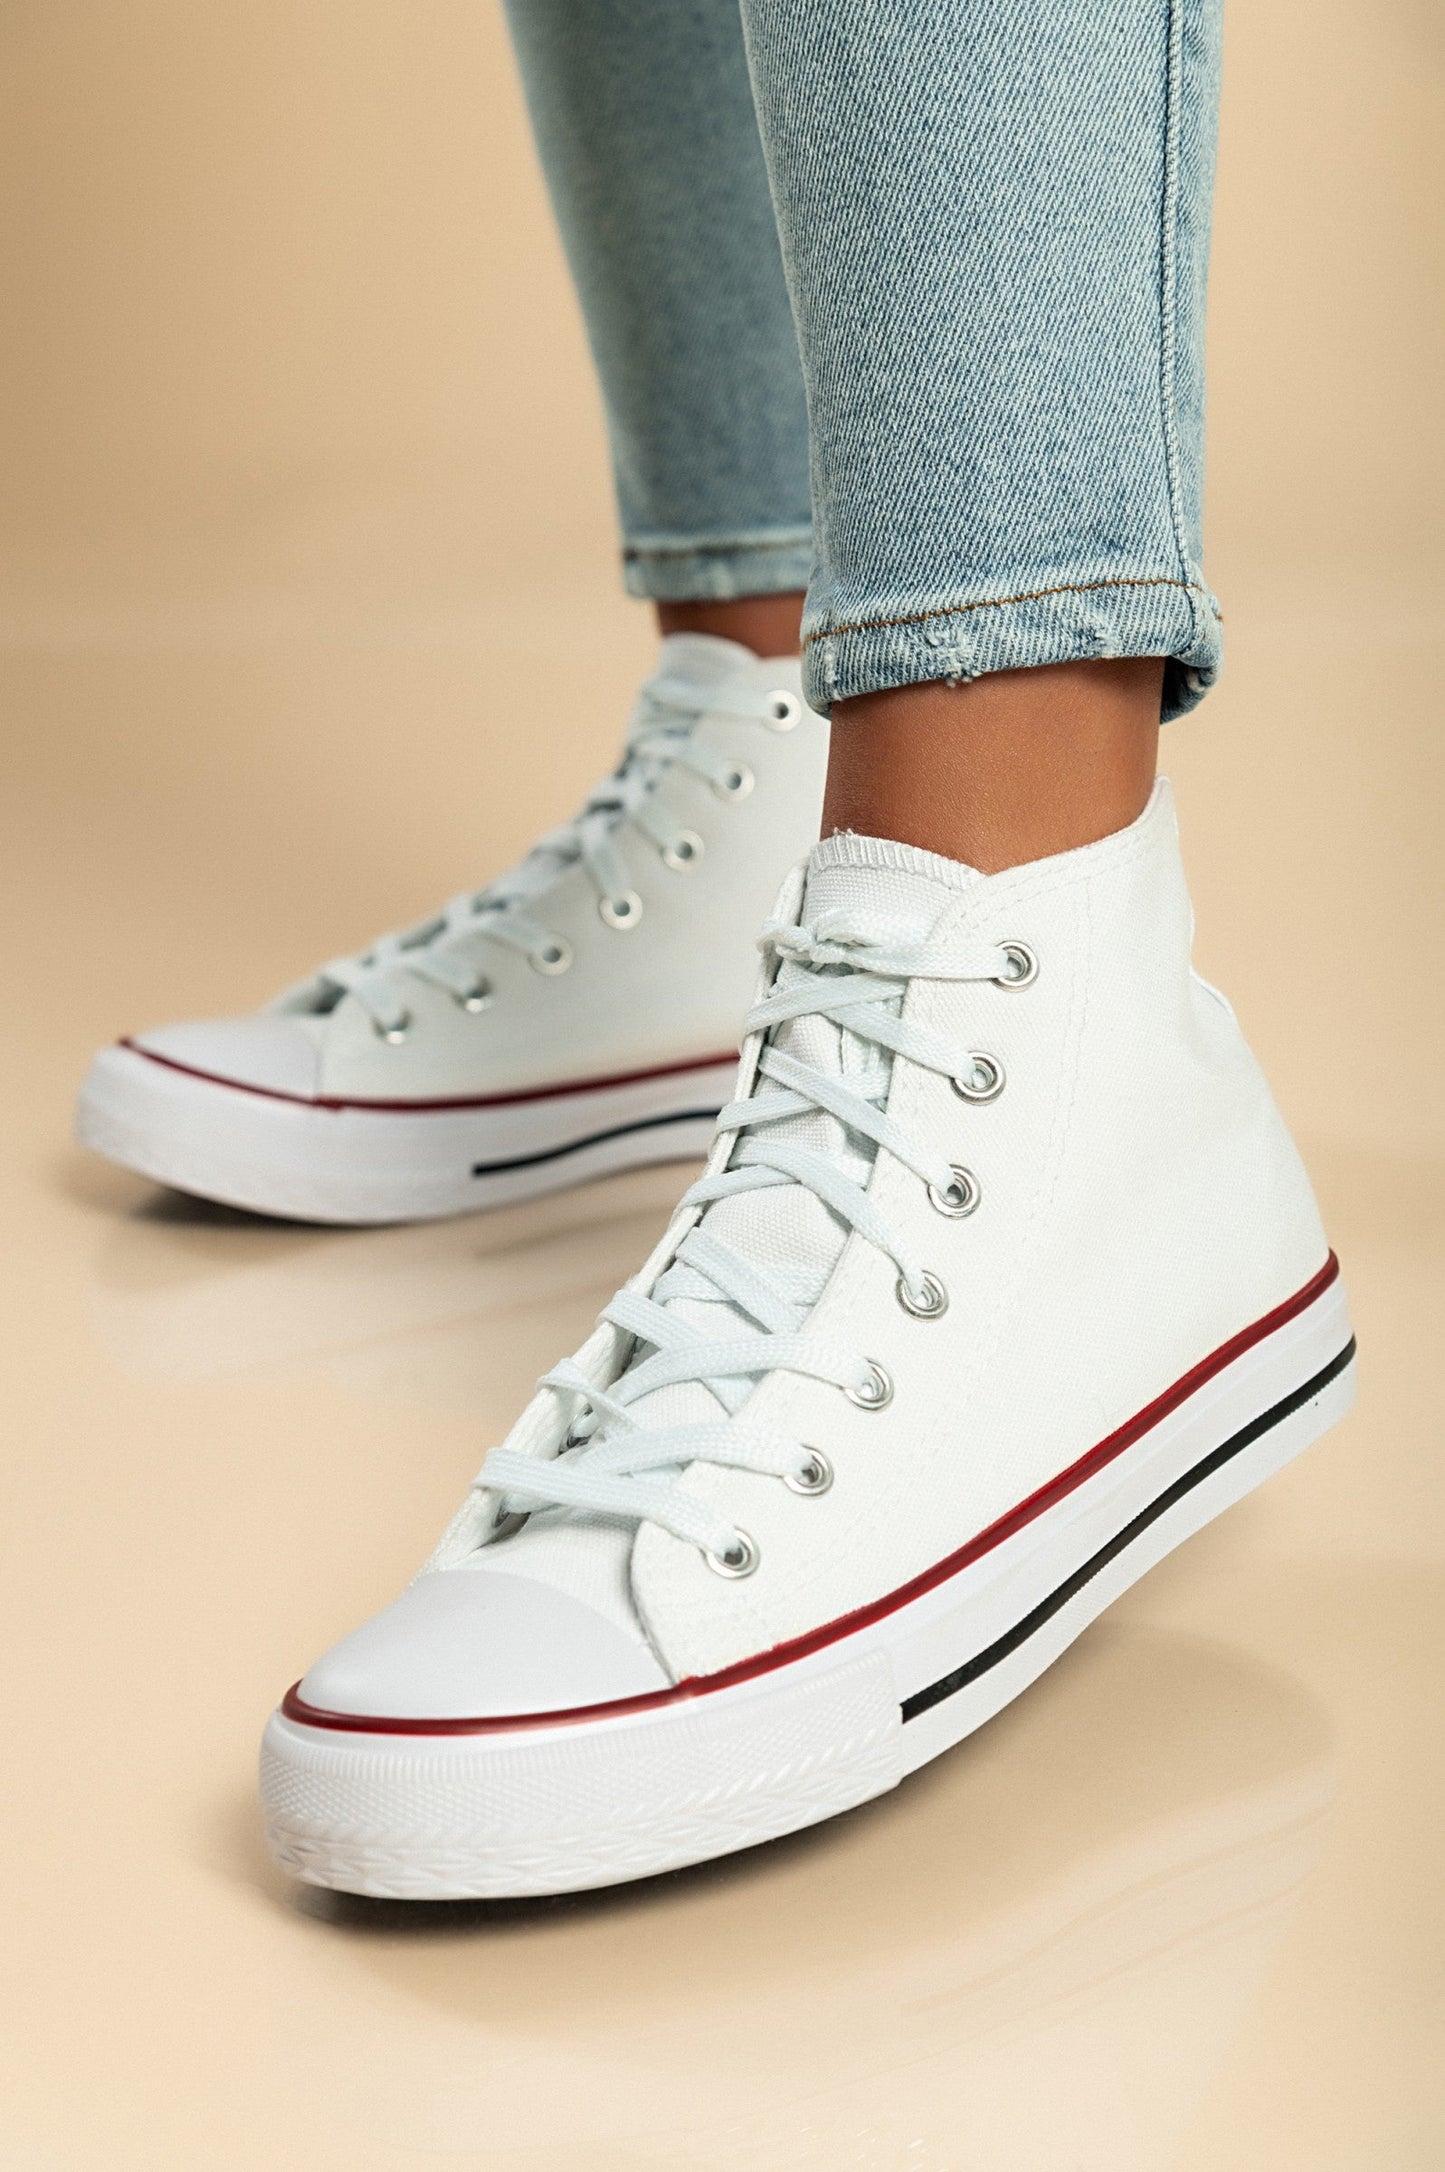 Stylish High-Top Canvas Sneakers